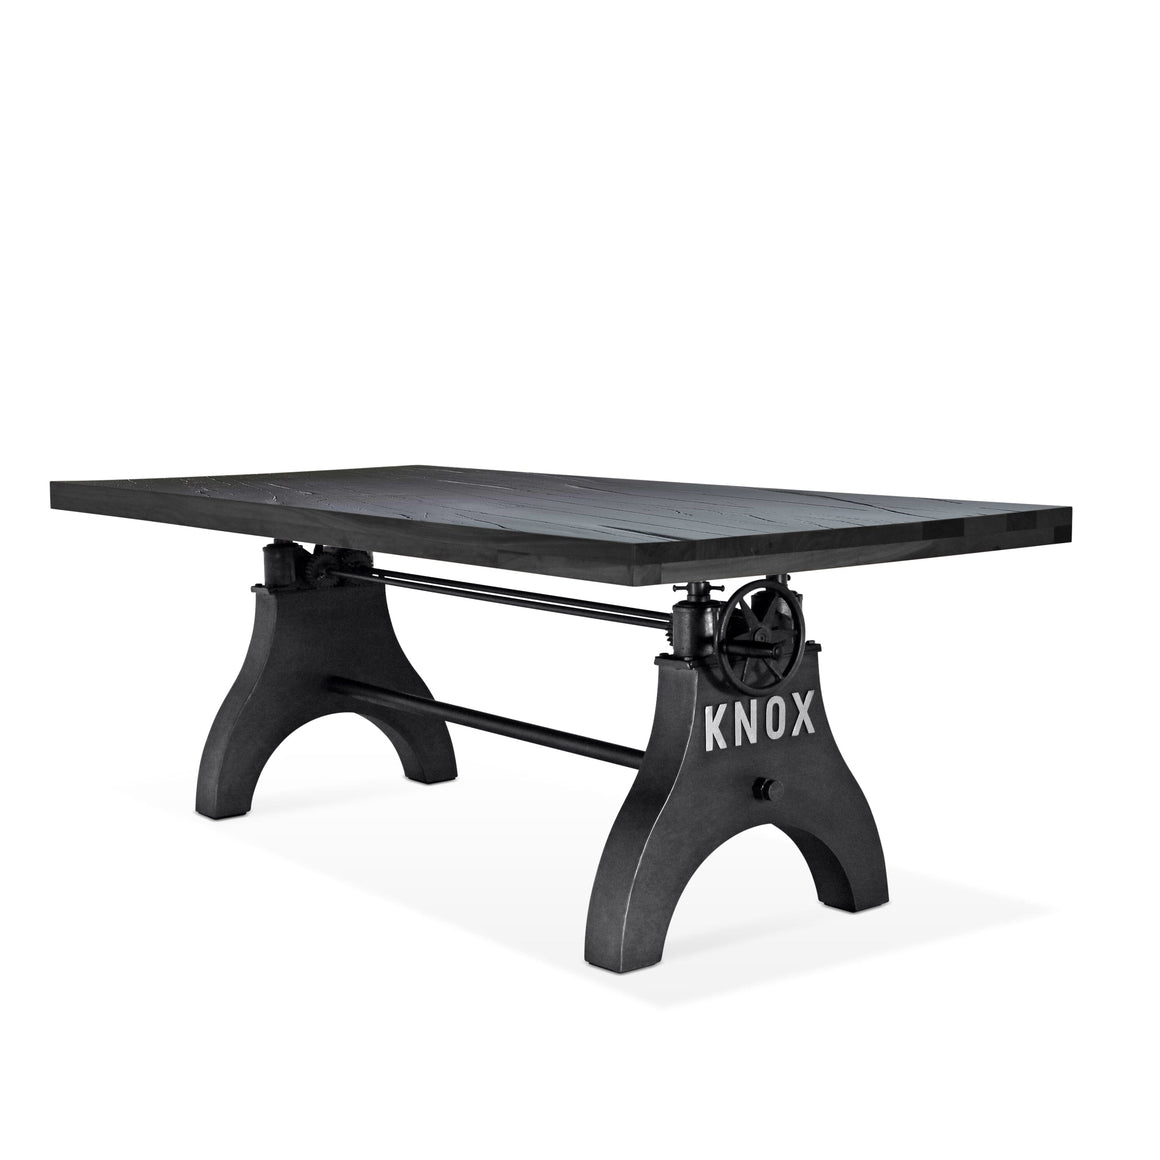 KNOX Adjustable Dining Table - Cast Iron Base - Rustic Black Ebony Dining Table Rustic Deco